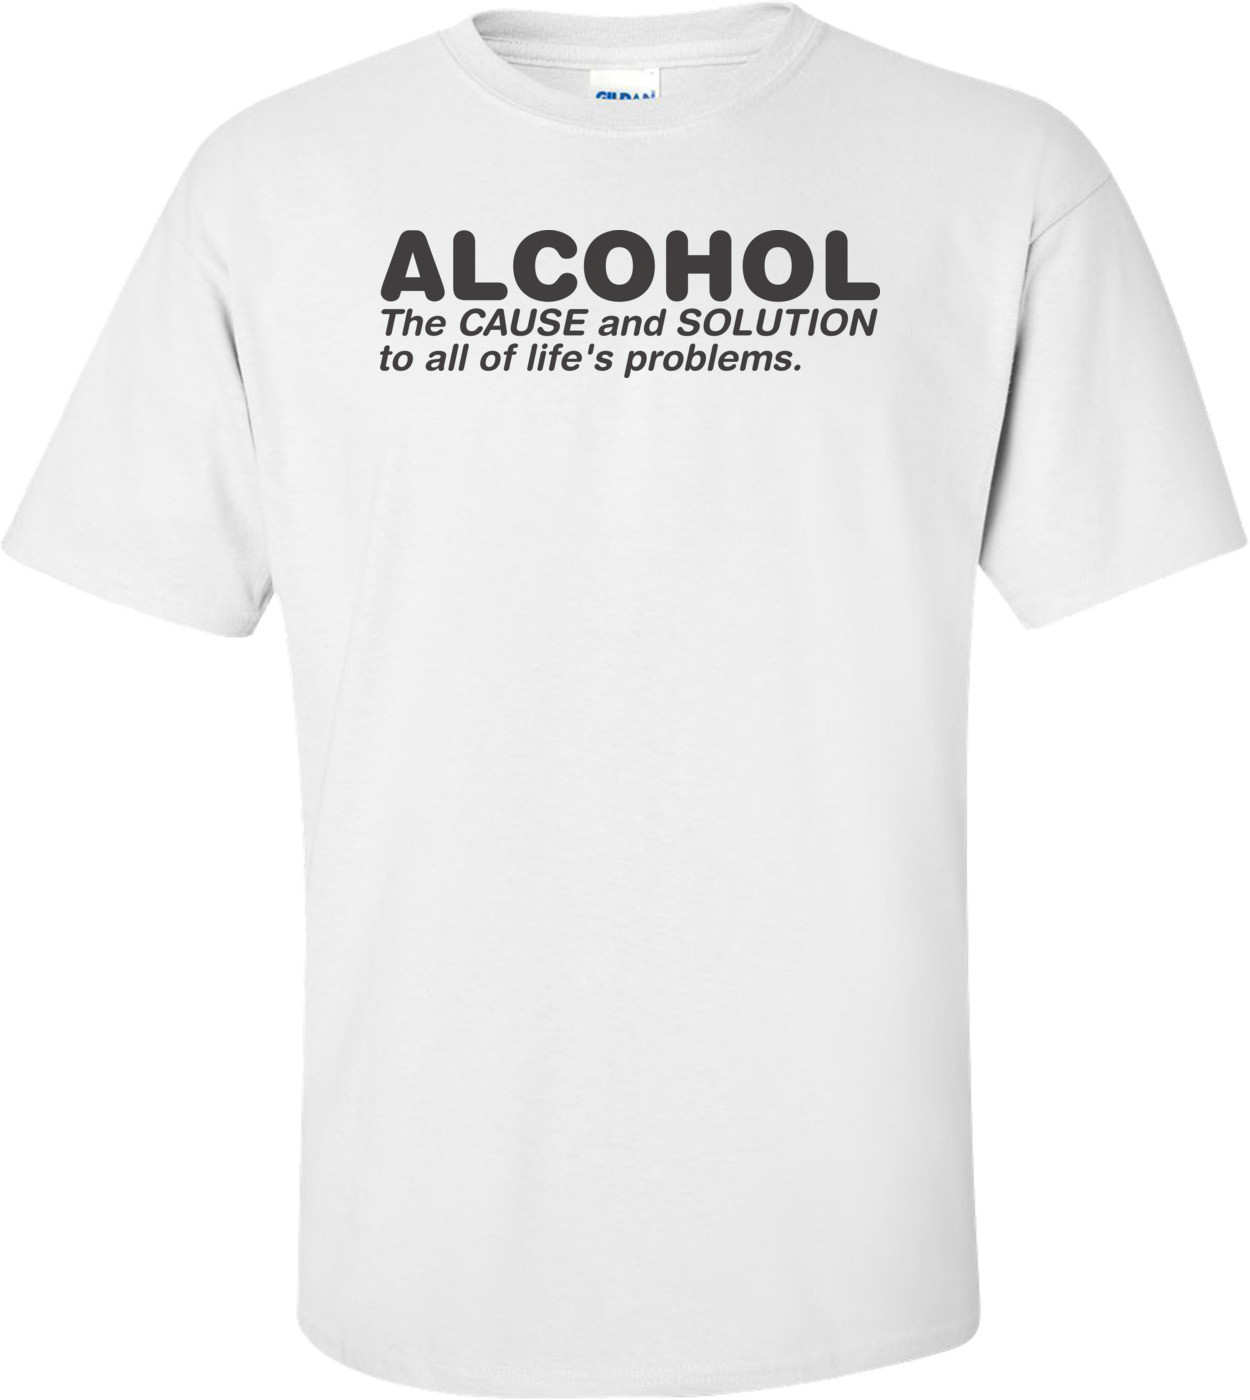 Alcohol The Cause And Solution To All Of Life's Problems T-shirt  